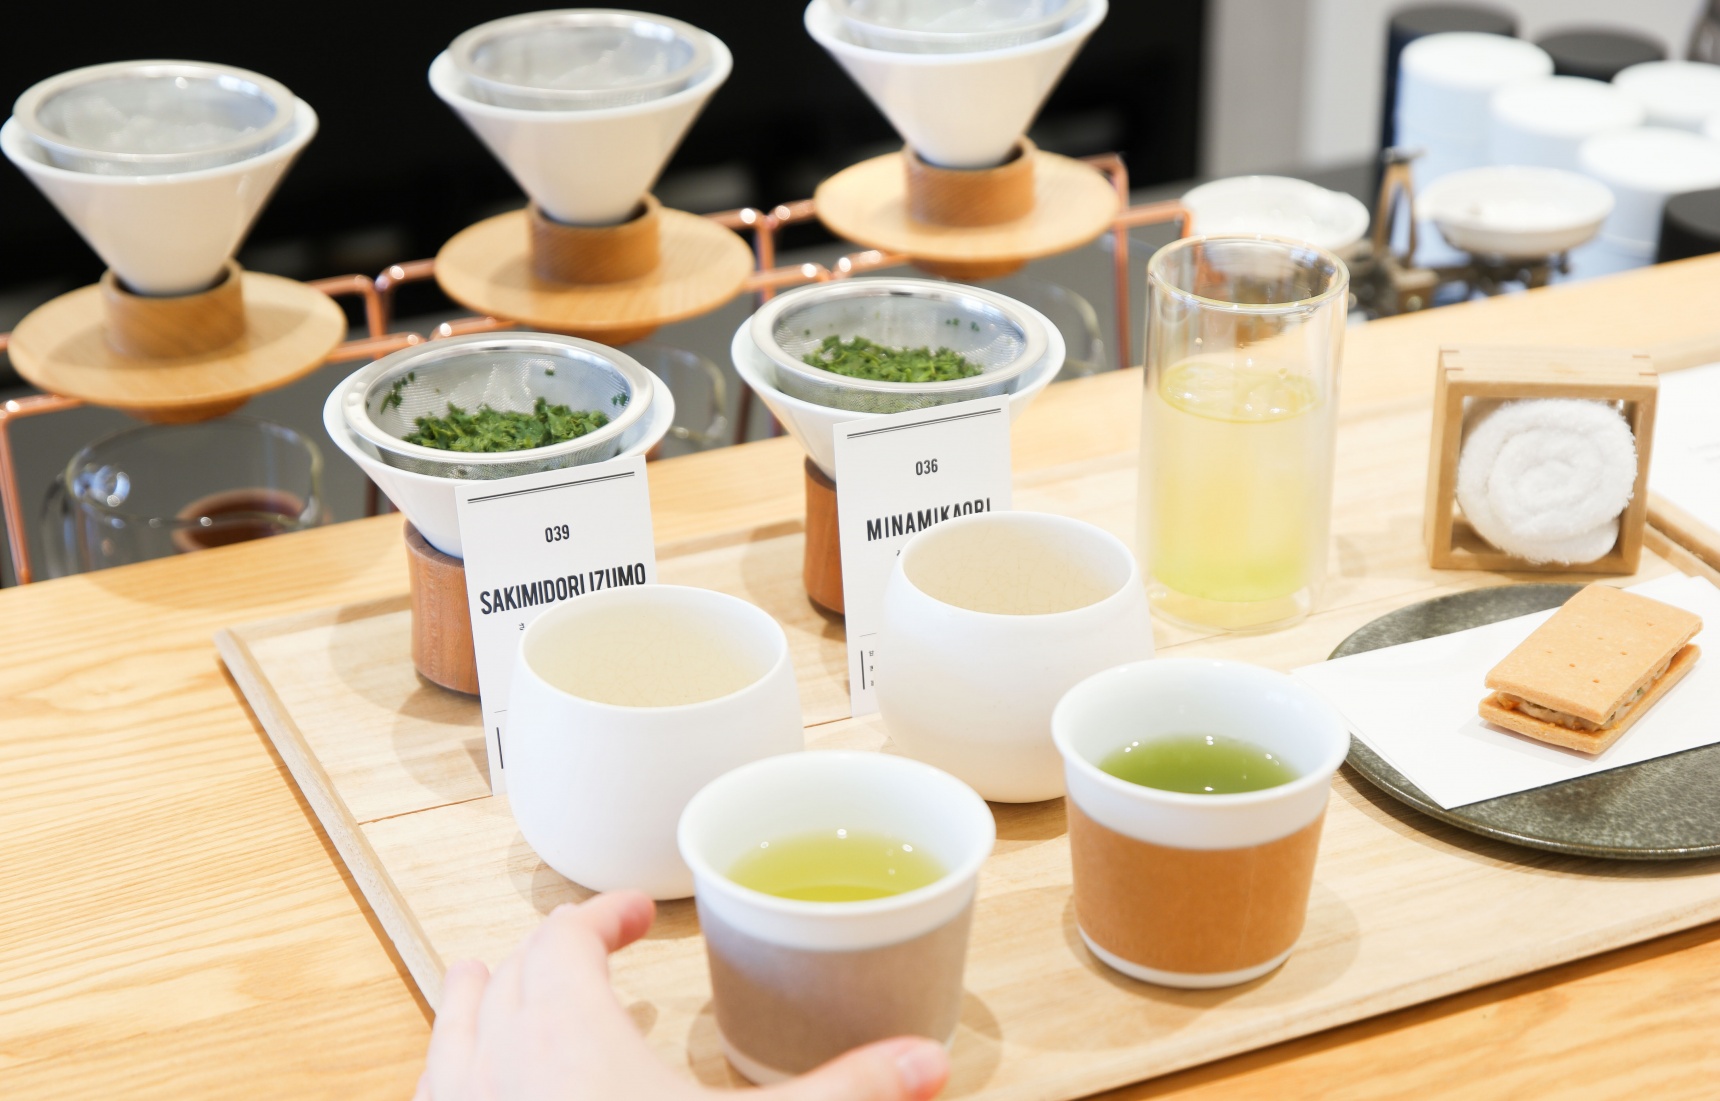 Taste the Perfect Cup of Brewed Green Tea